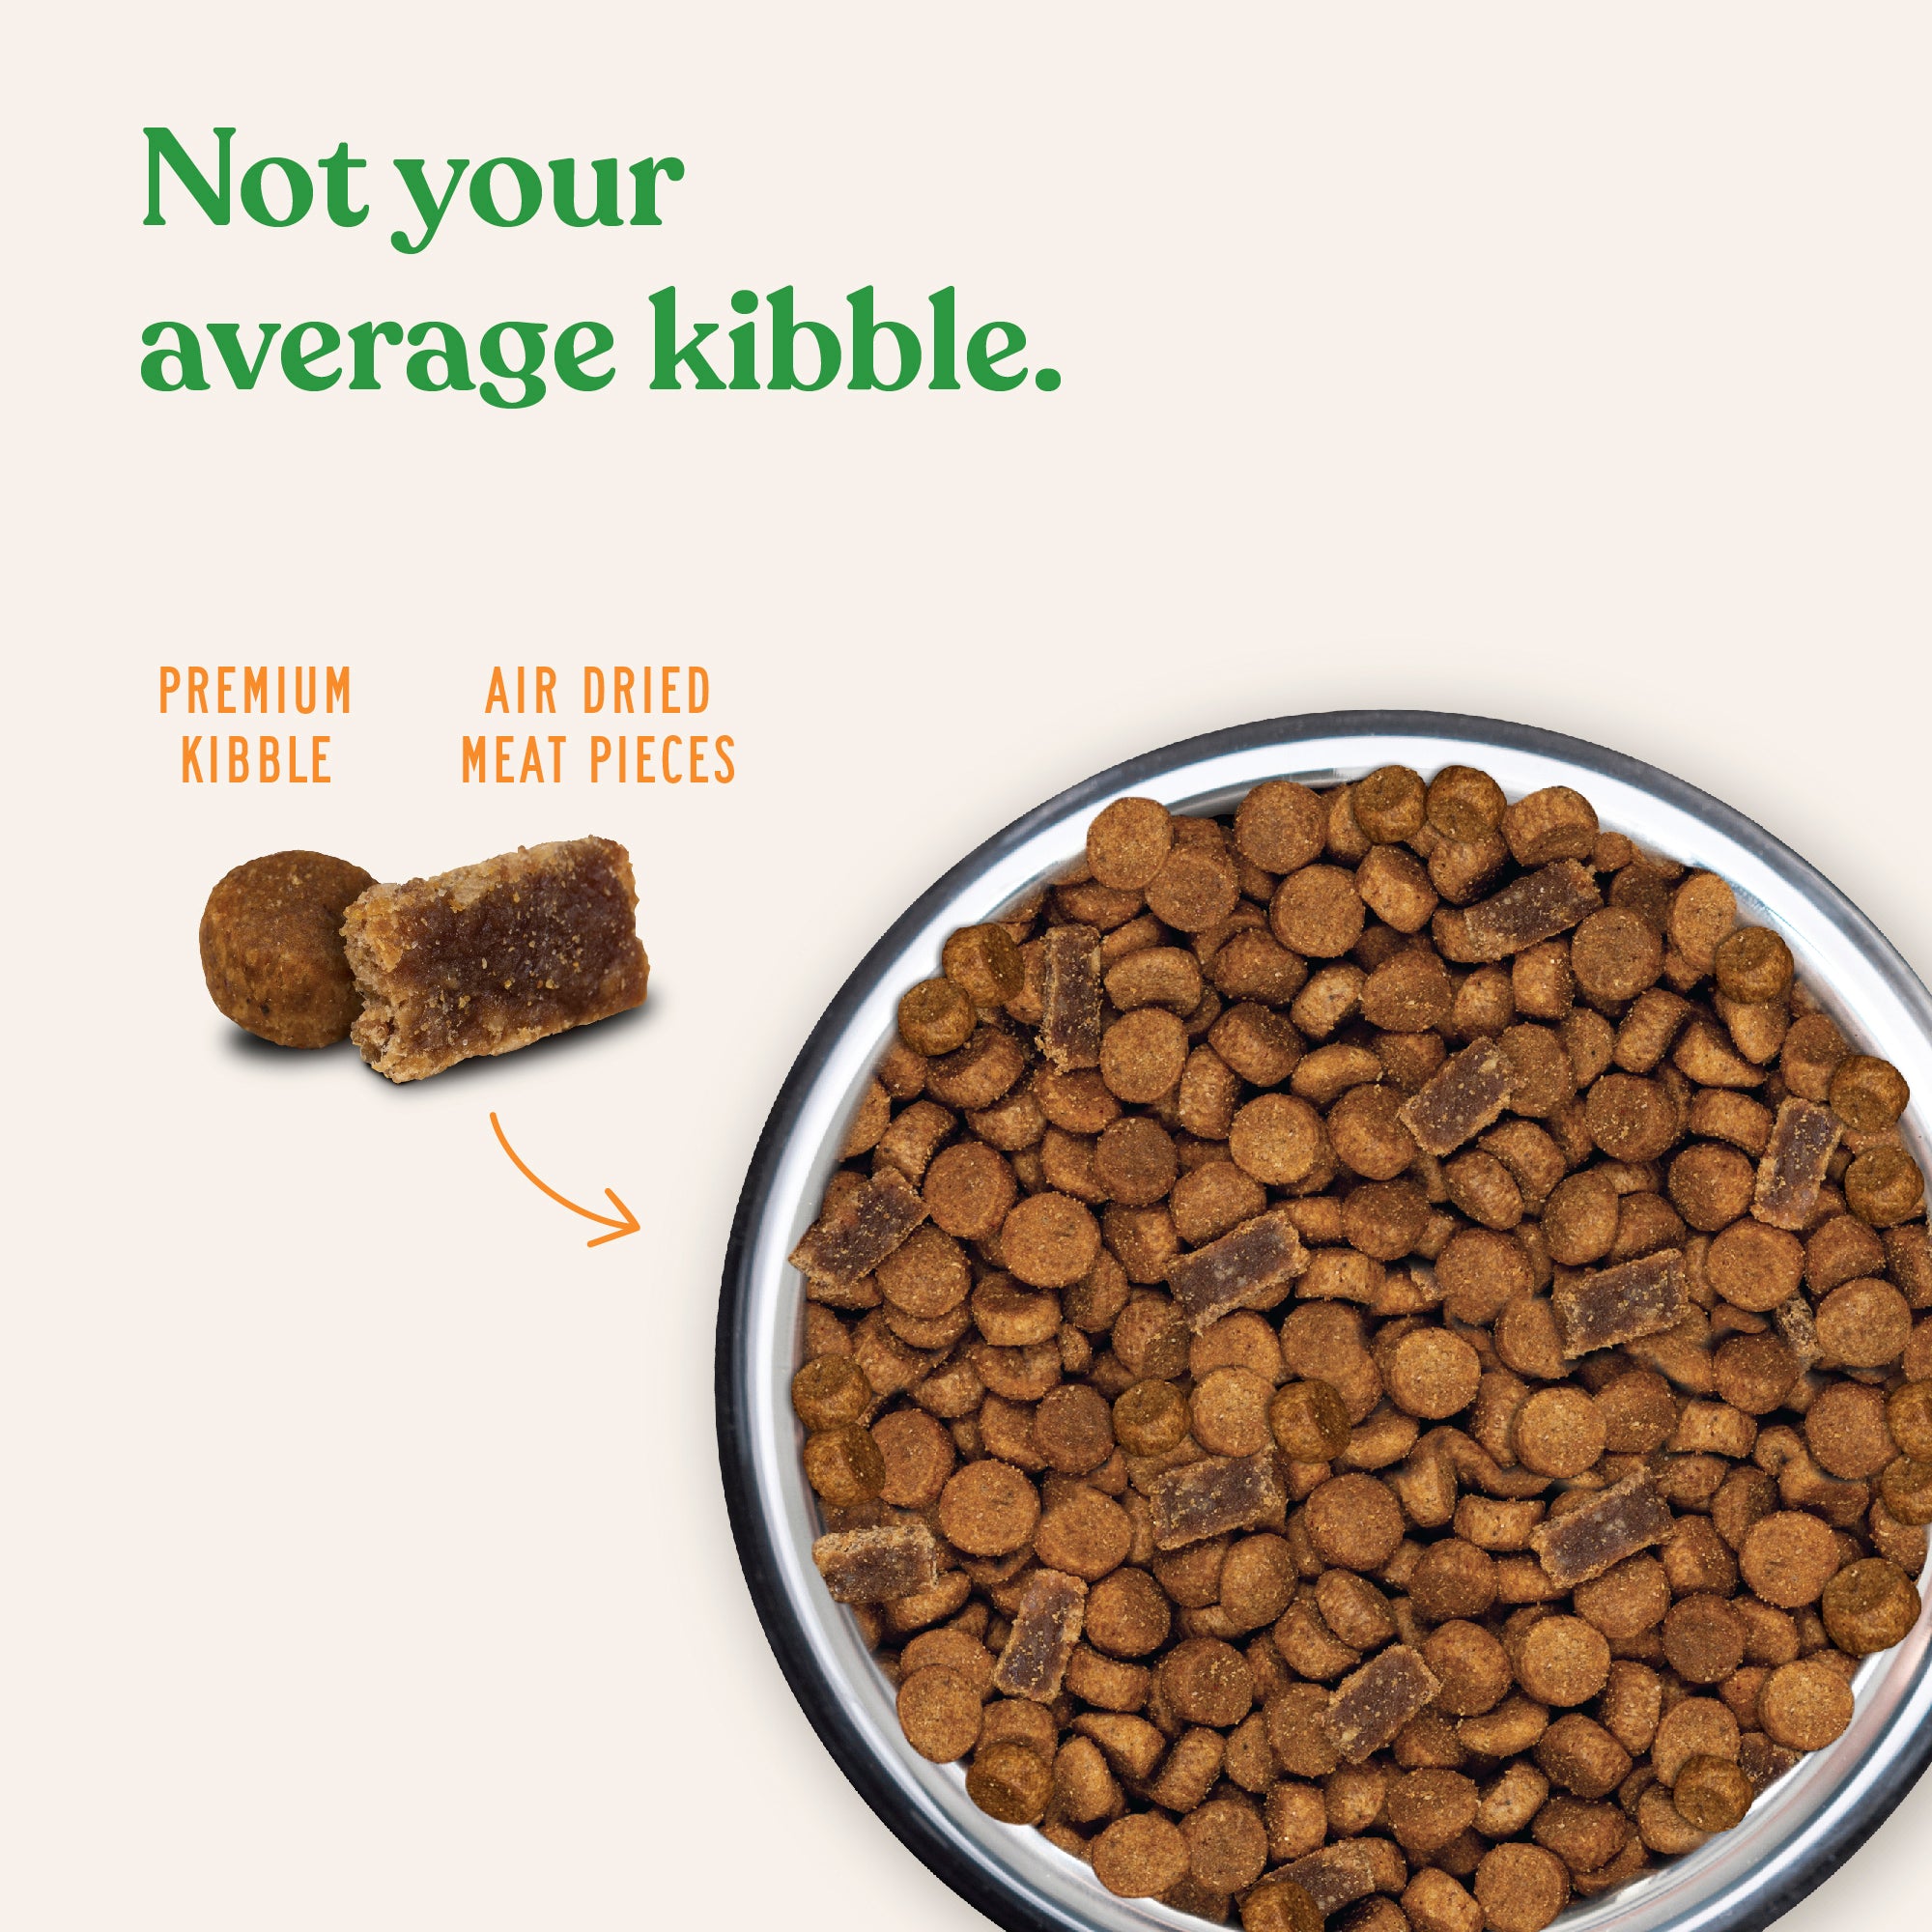 Higher Welfare Chicken Kibble + Air Dried Meat for Dogs